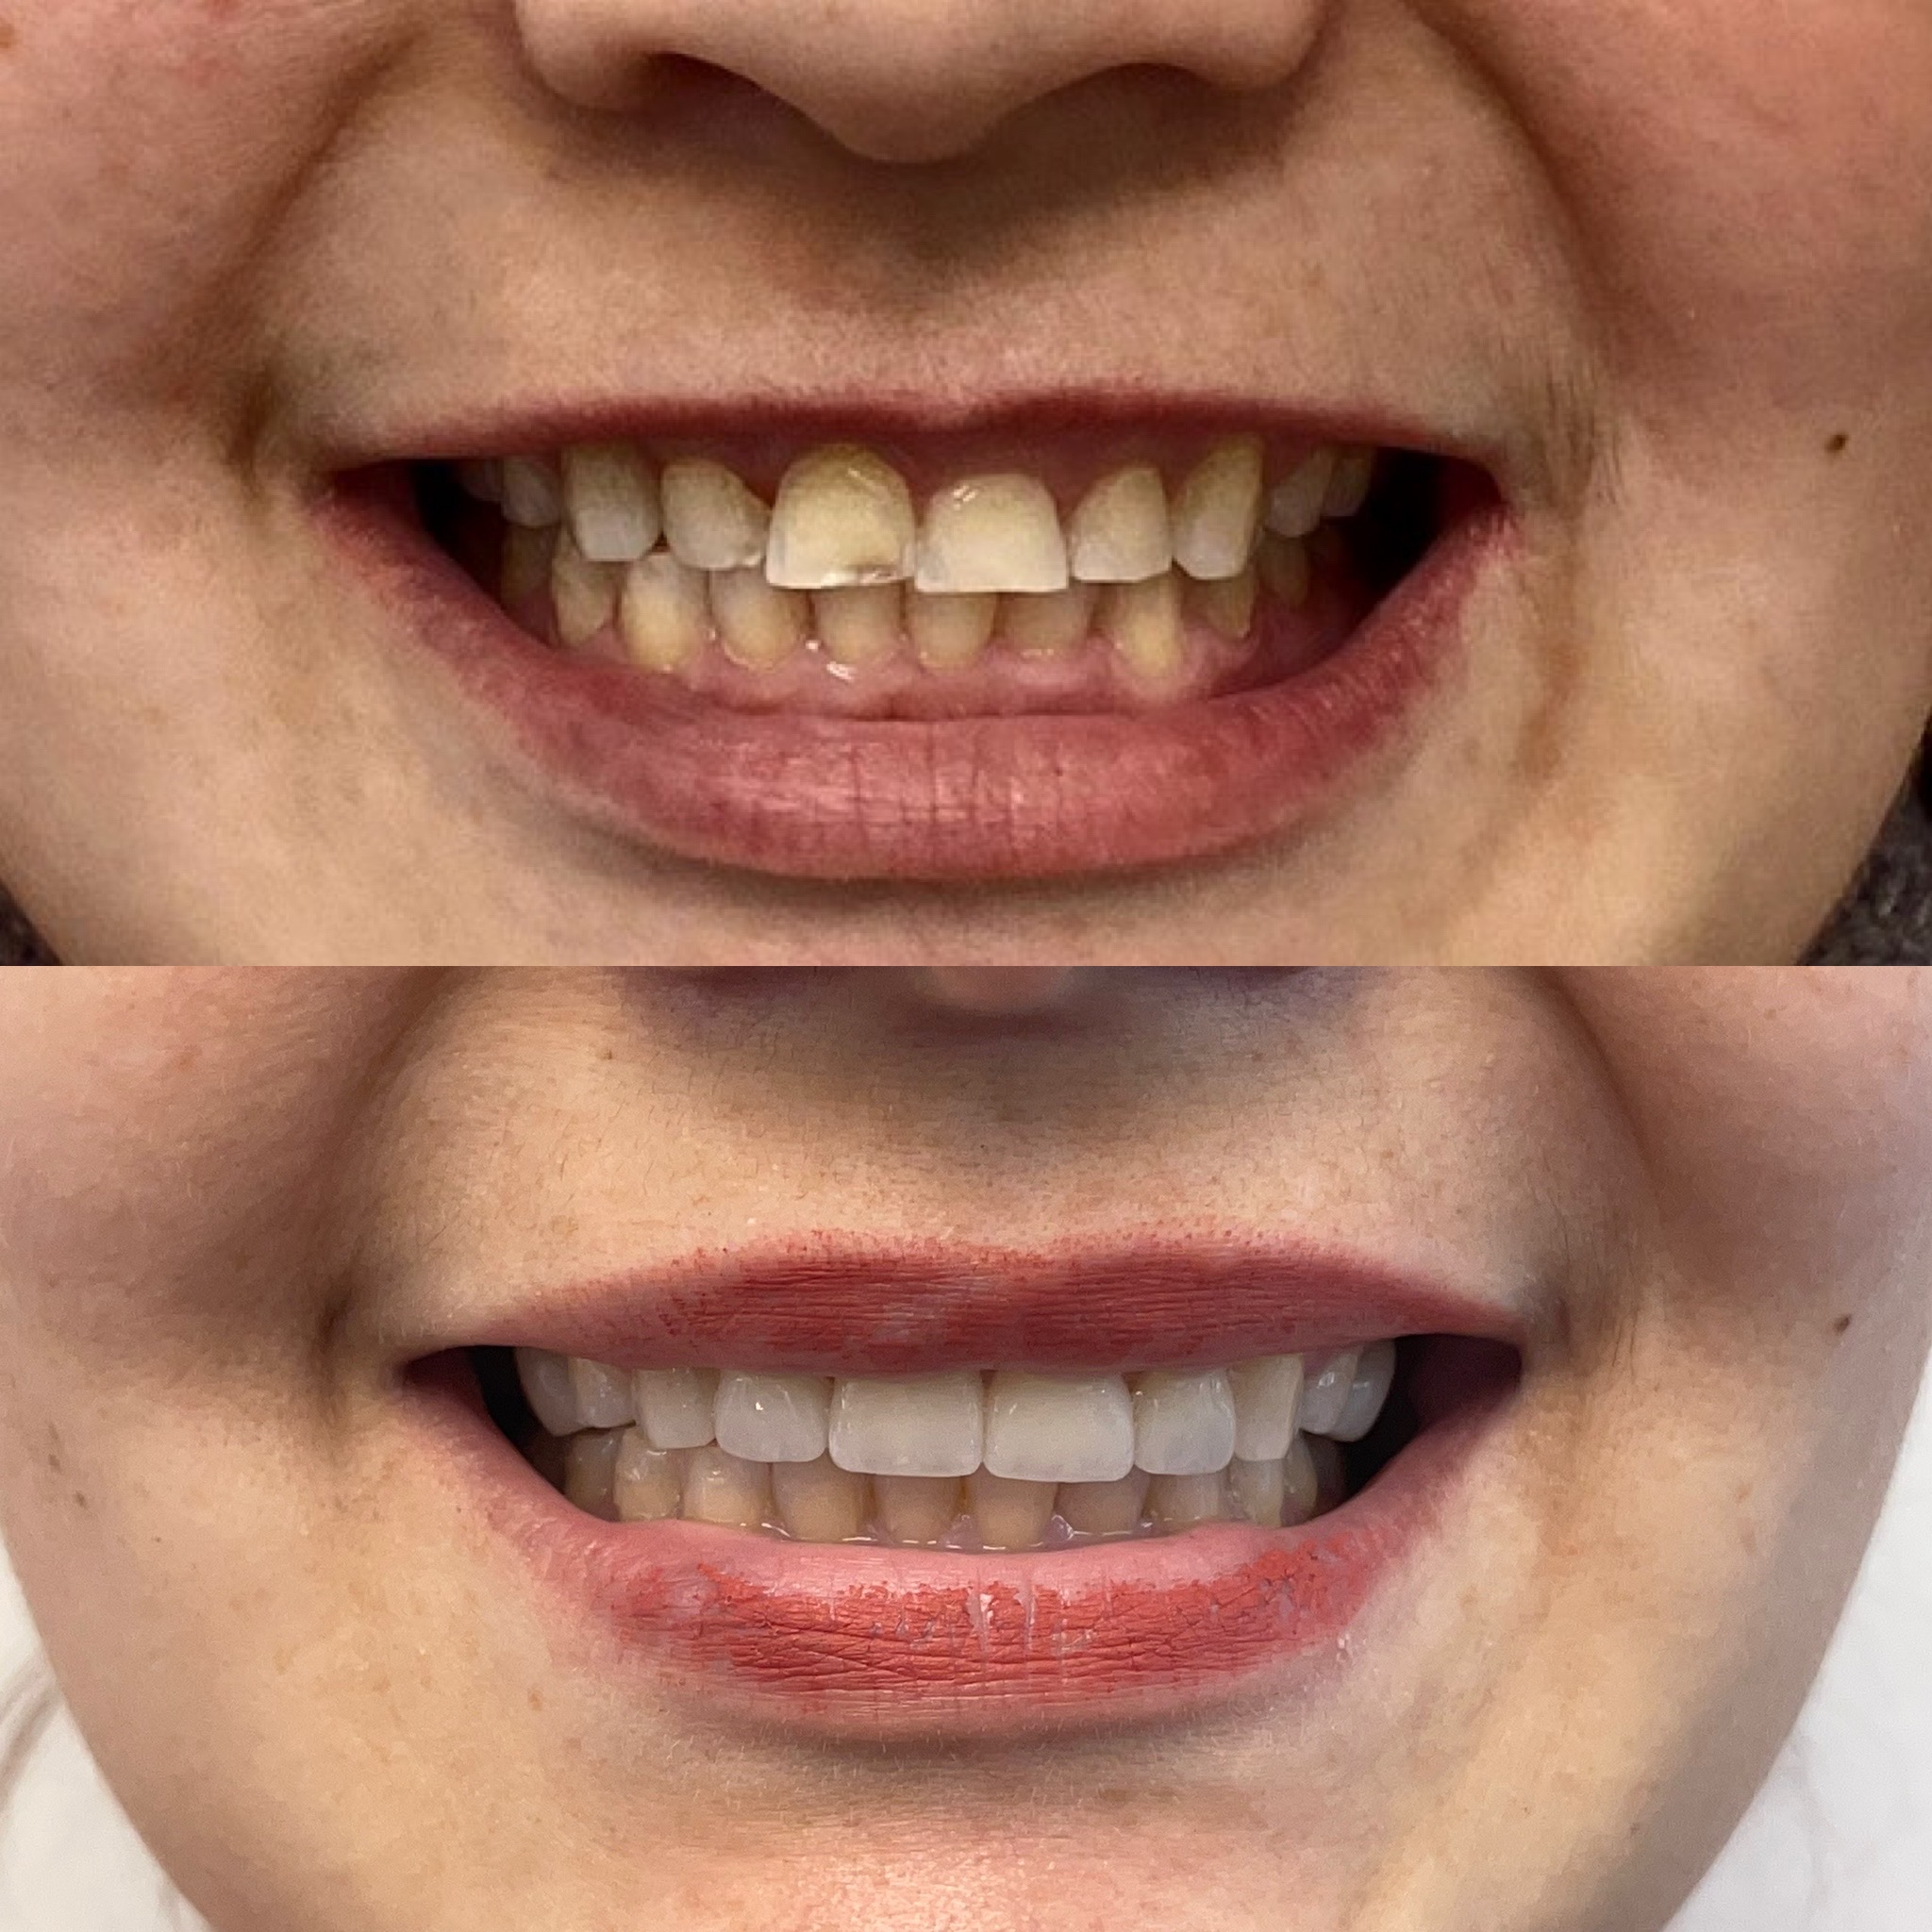 Give Dental - Woman Patient - Veneers before and after